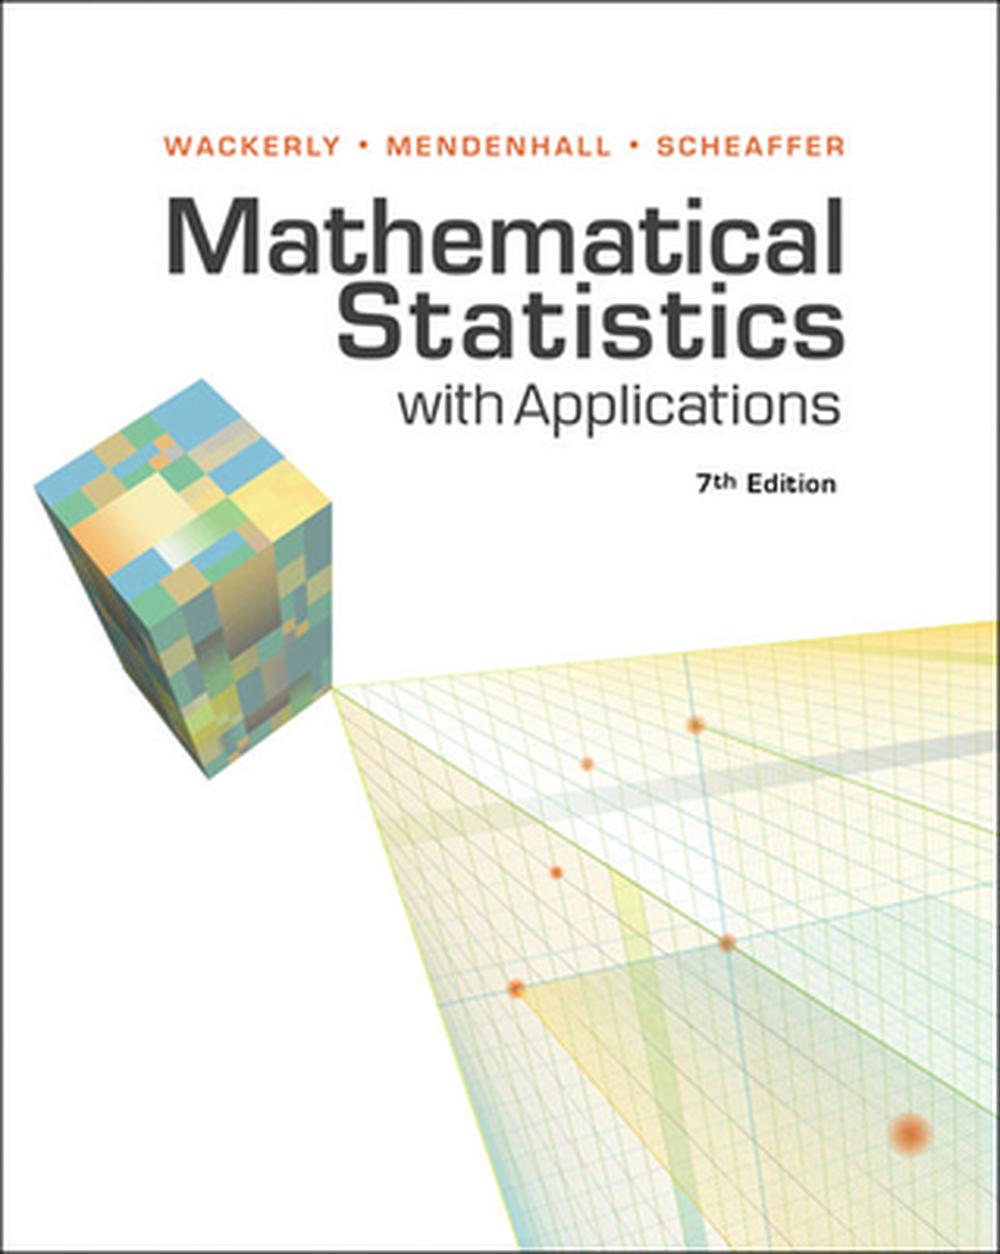 Mathematical Statistics with Applications, 7th Edition by Dennis